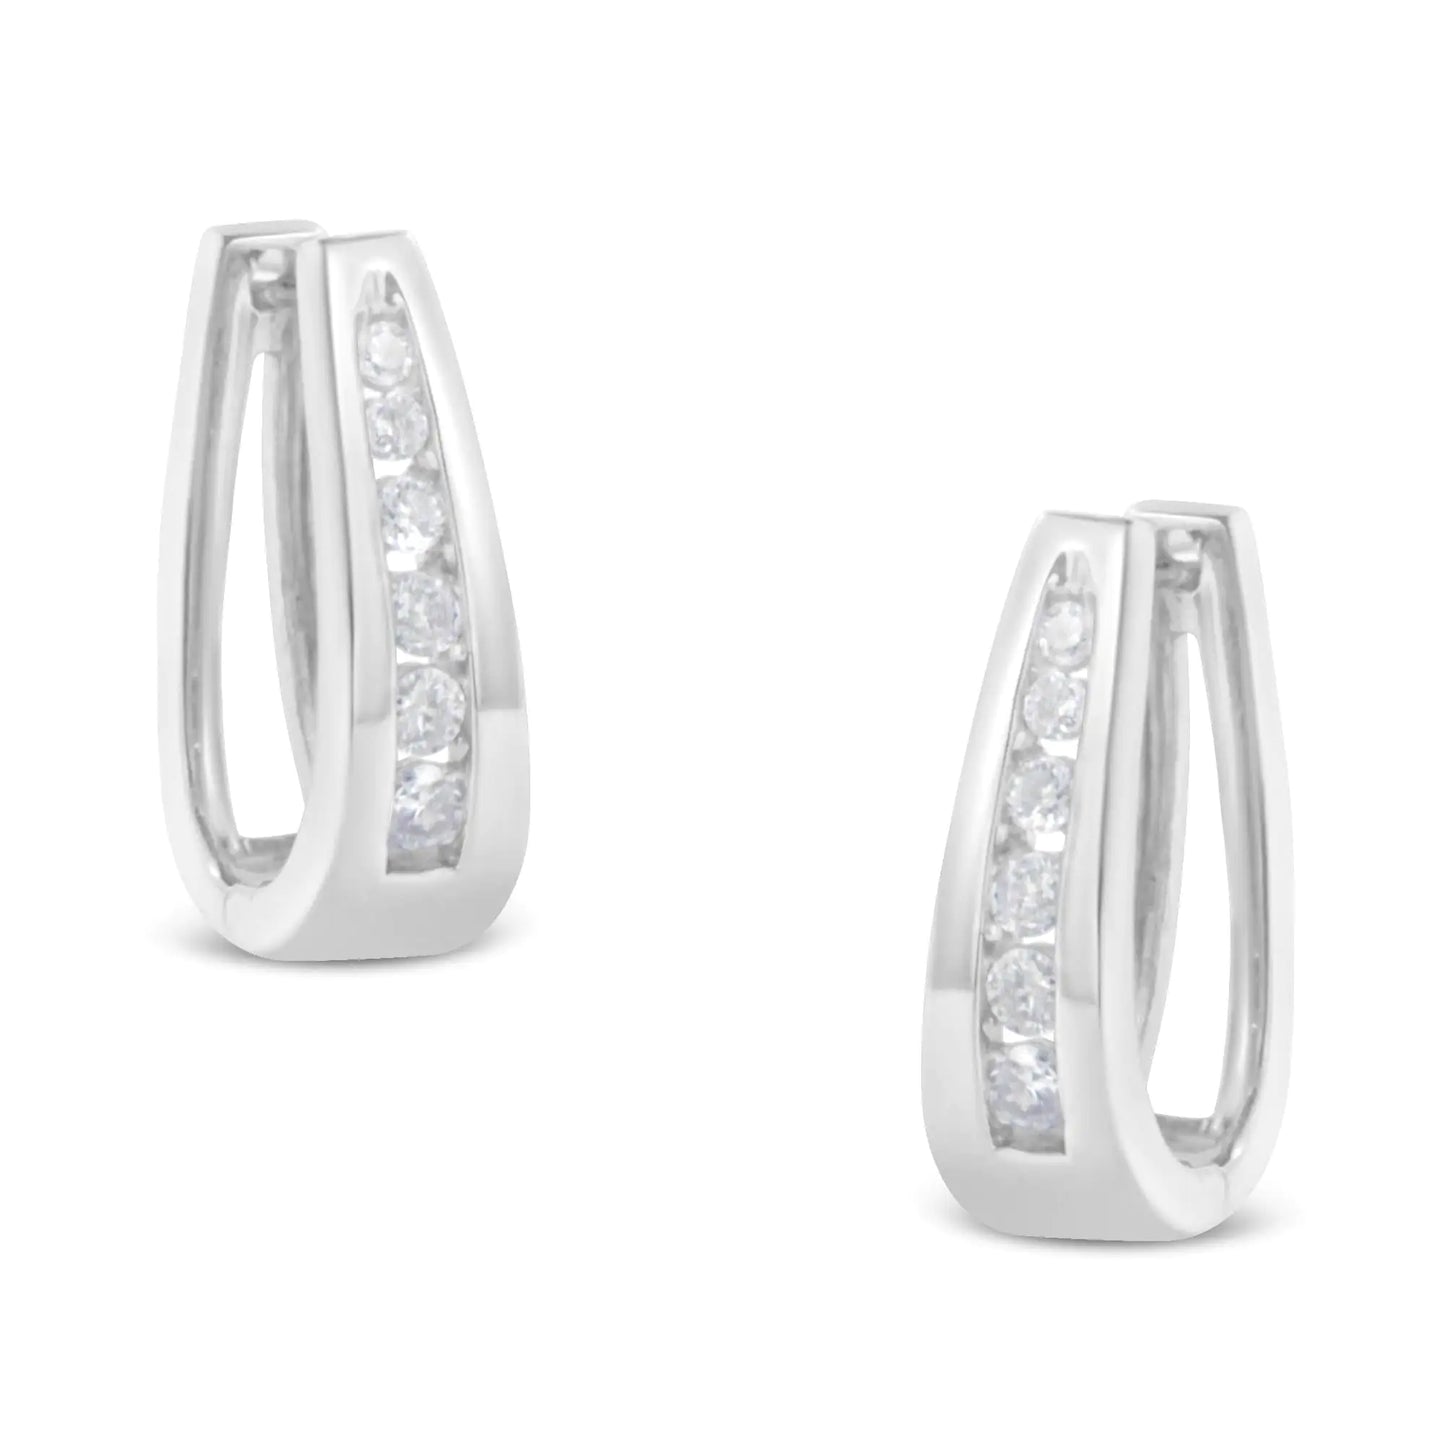 Round-cut diamond earrings in 14 carat white gold (color I-J, transparency I2-I3)